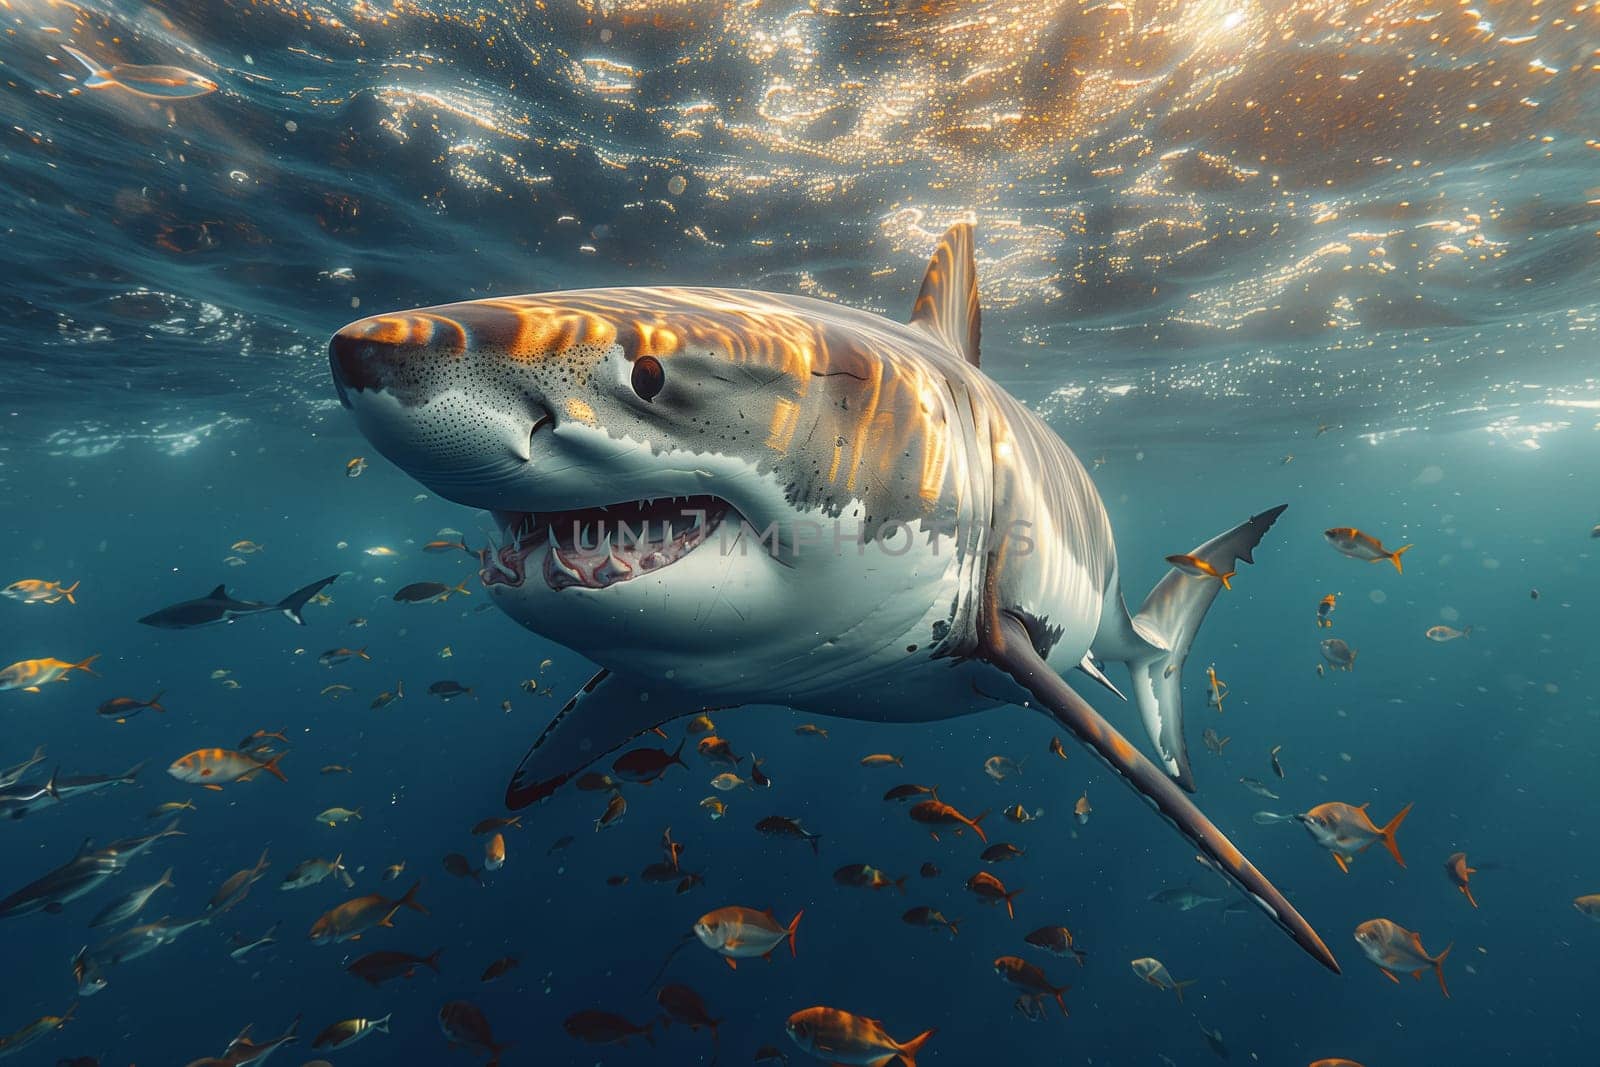 A Great white shark swims in the ocean among fish in its natural habitat by richwolf